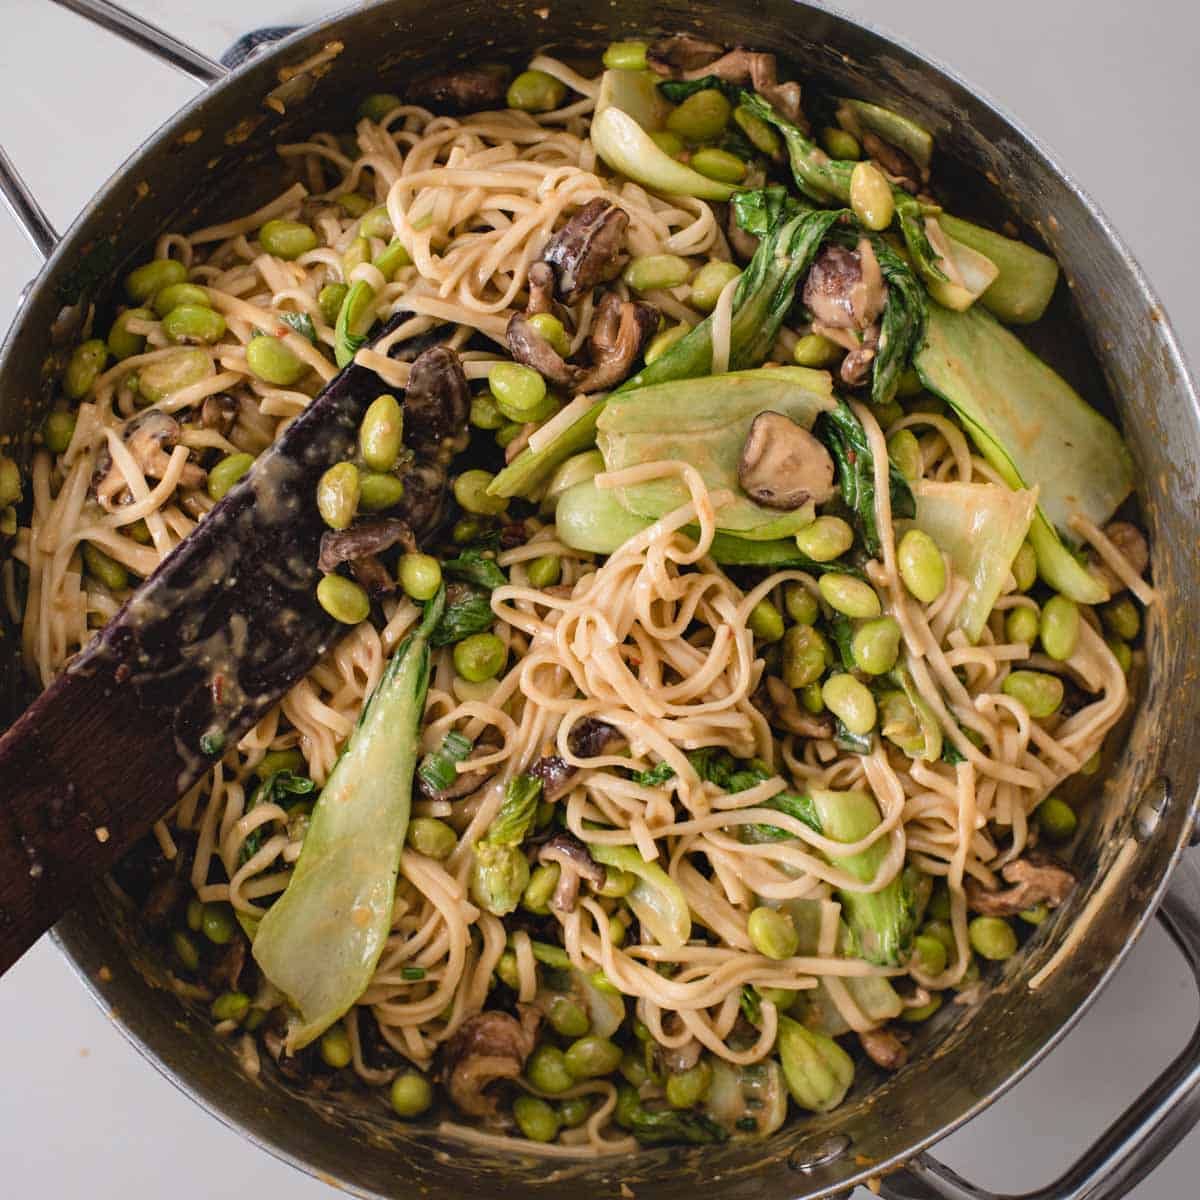 noodles and veggies tossed with sauce in a skillet